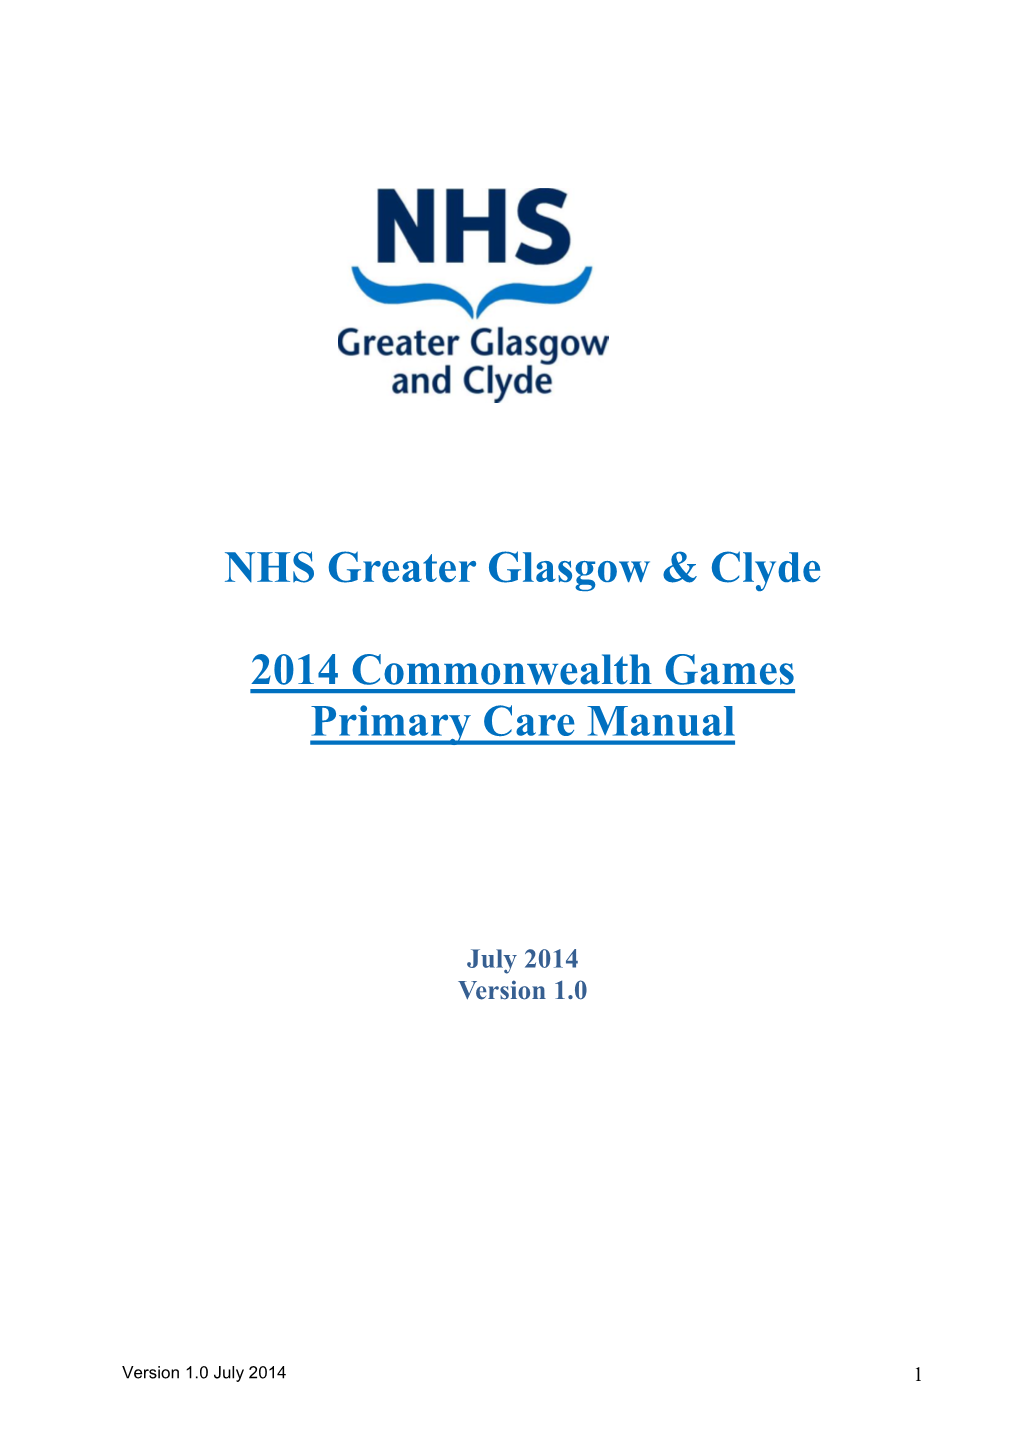 NHS Greater Glasgow & Clyde 2014 Commonwealth Games Primary